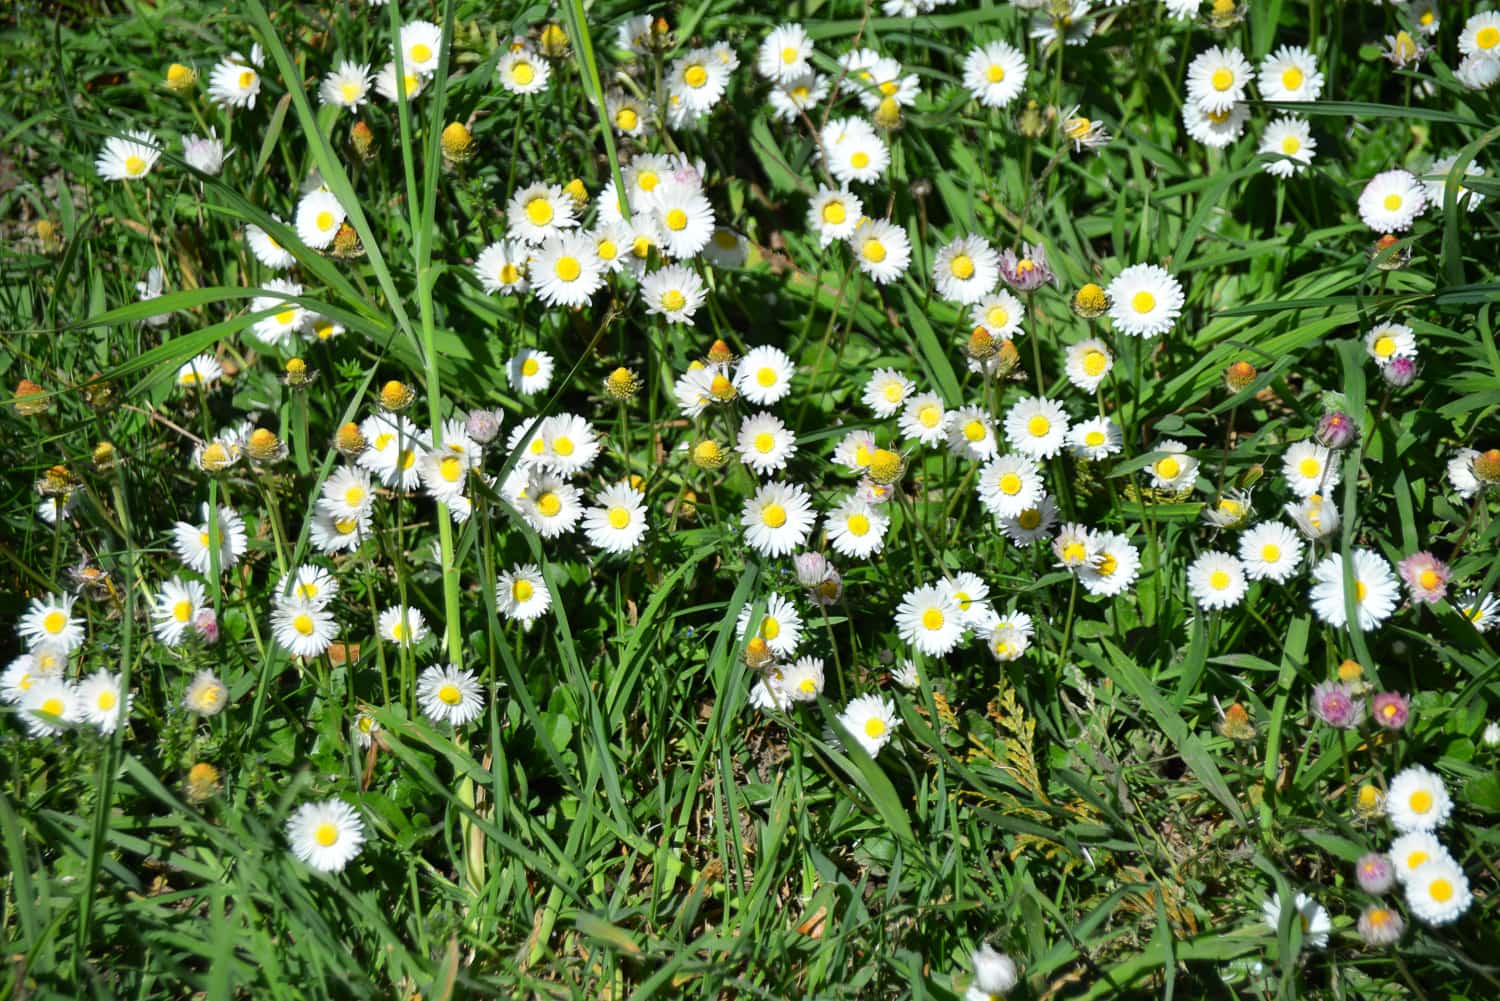 Daisies! Of what fun we had making all those daisy chains ...